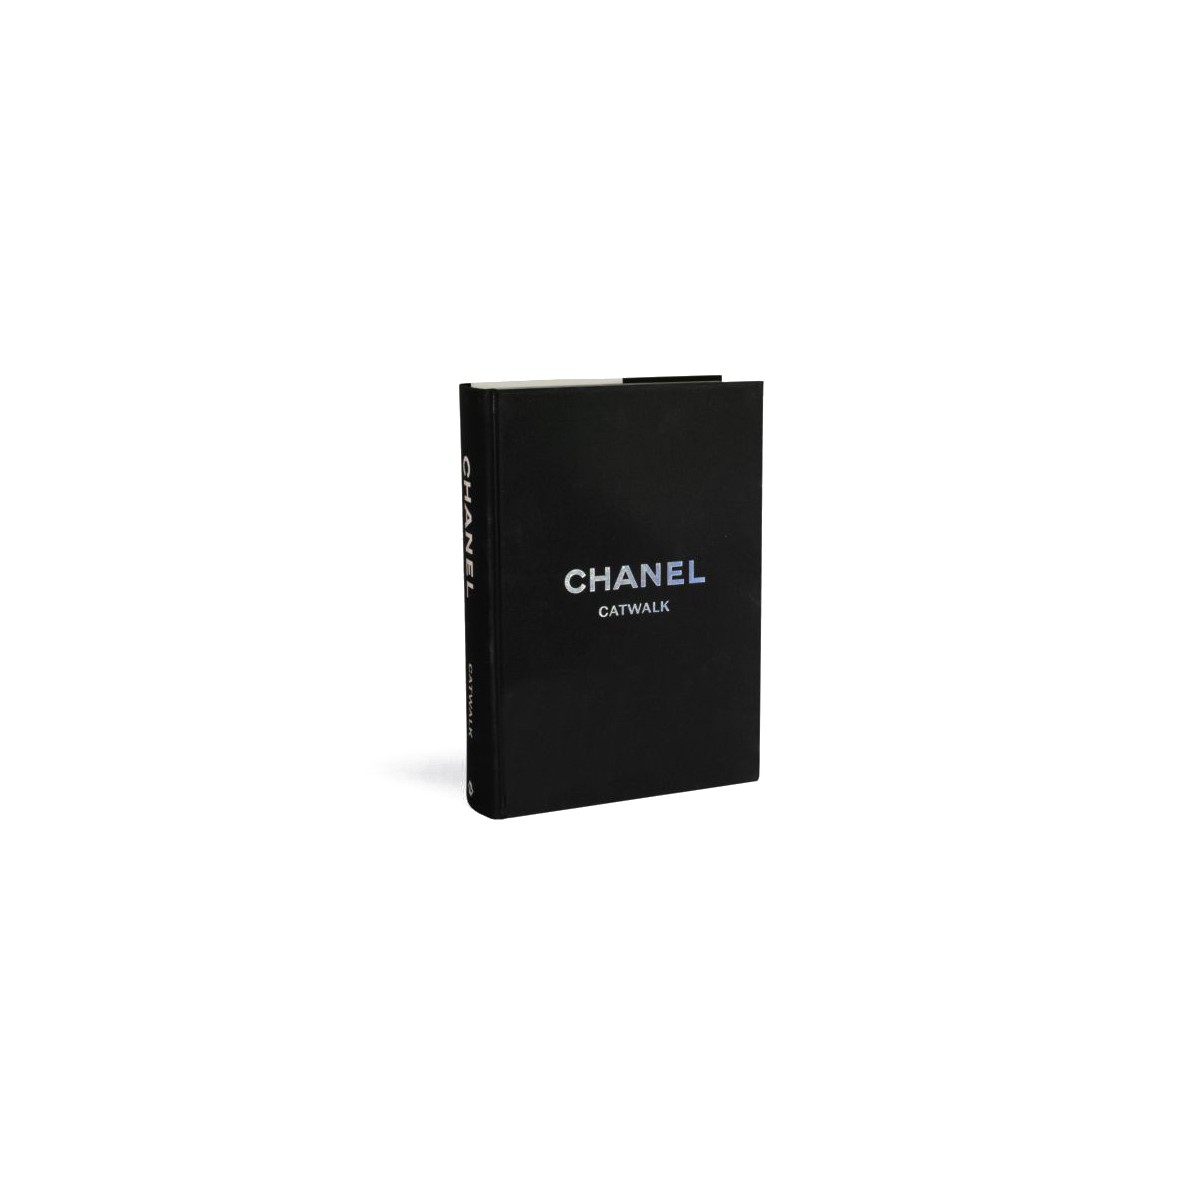 CHANEL The complete Collection Coffee Table Book. NEU.